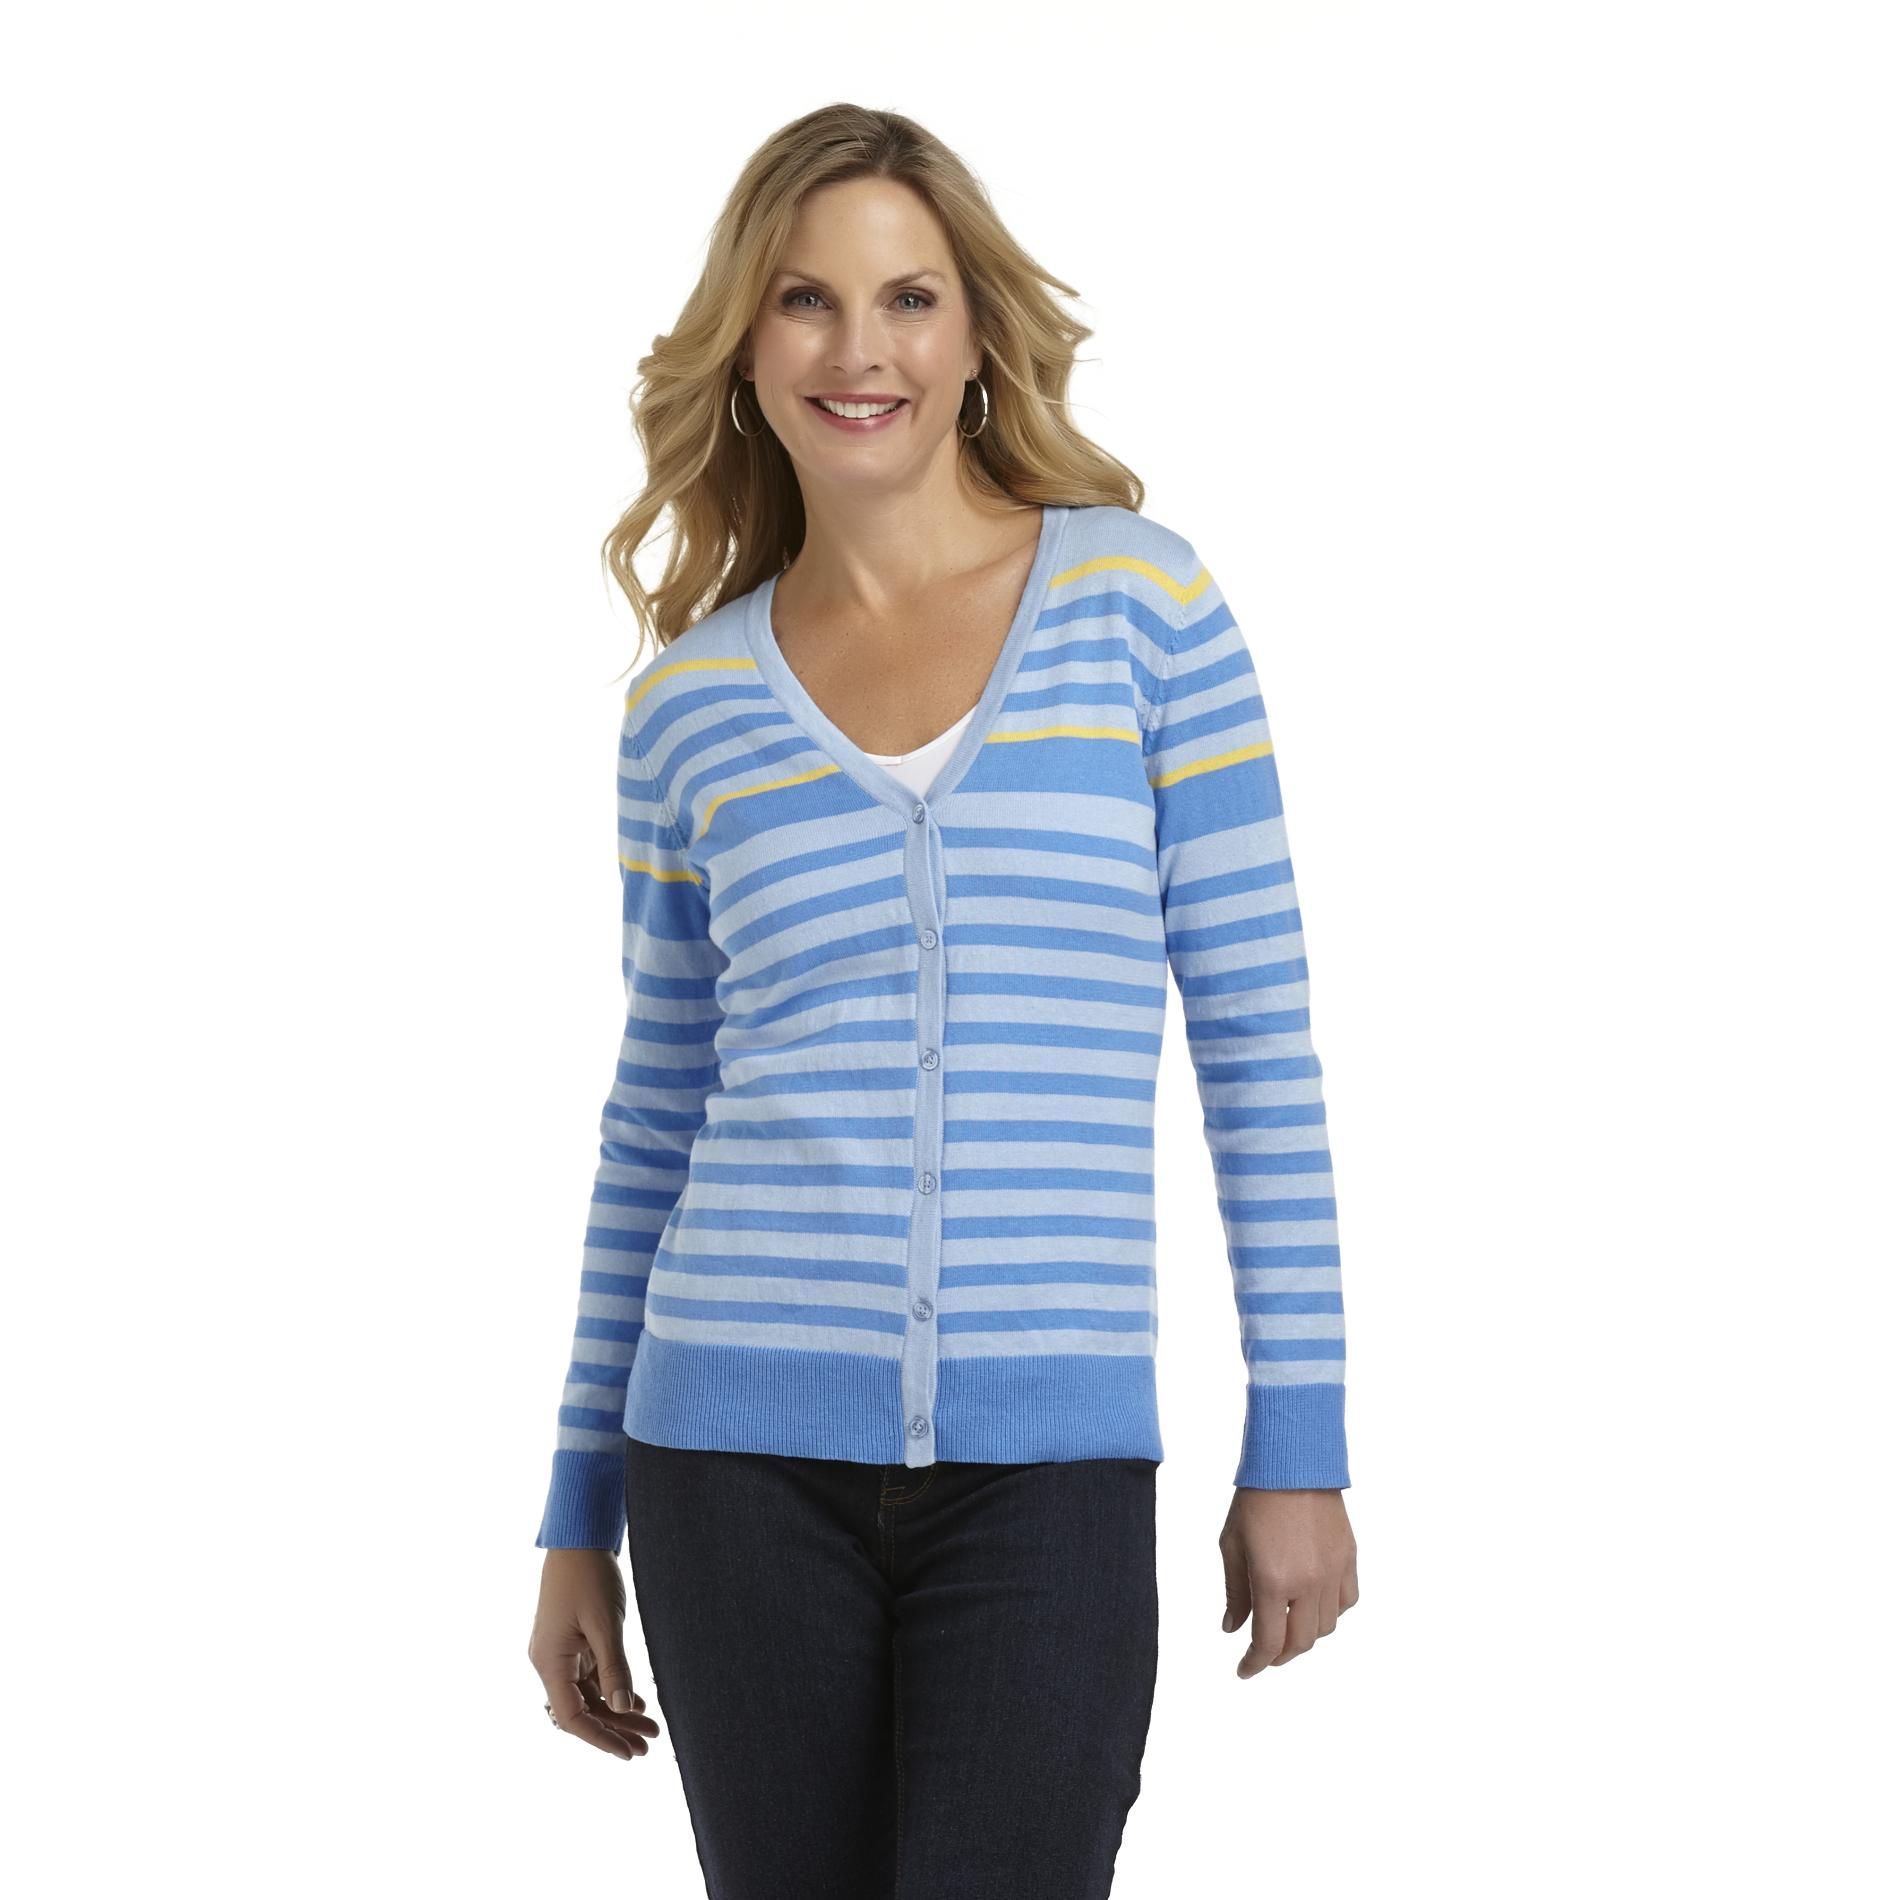 Basic Editions Women's Button-Front V-Neck Cardigan - Striped